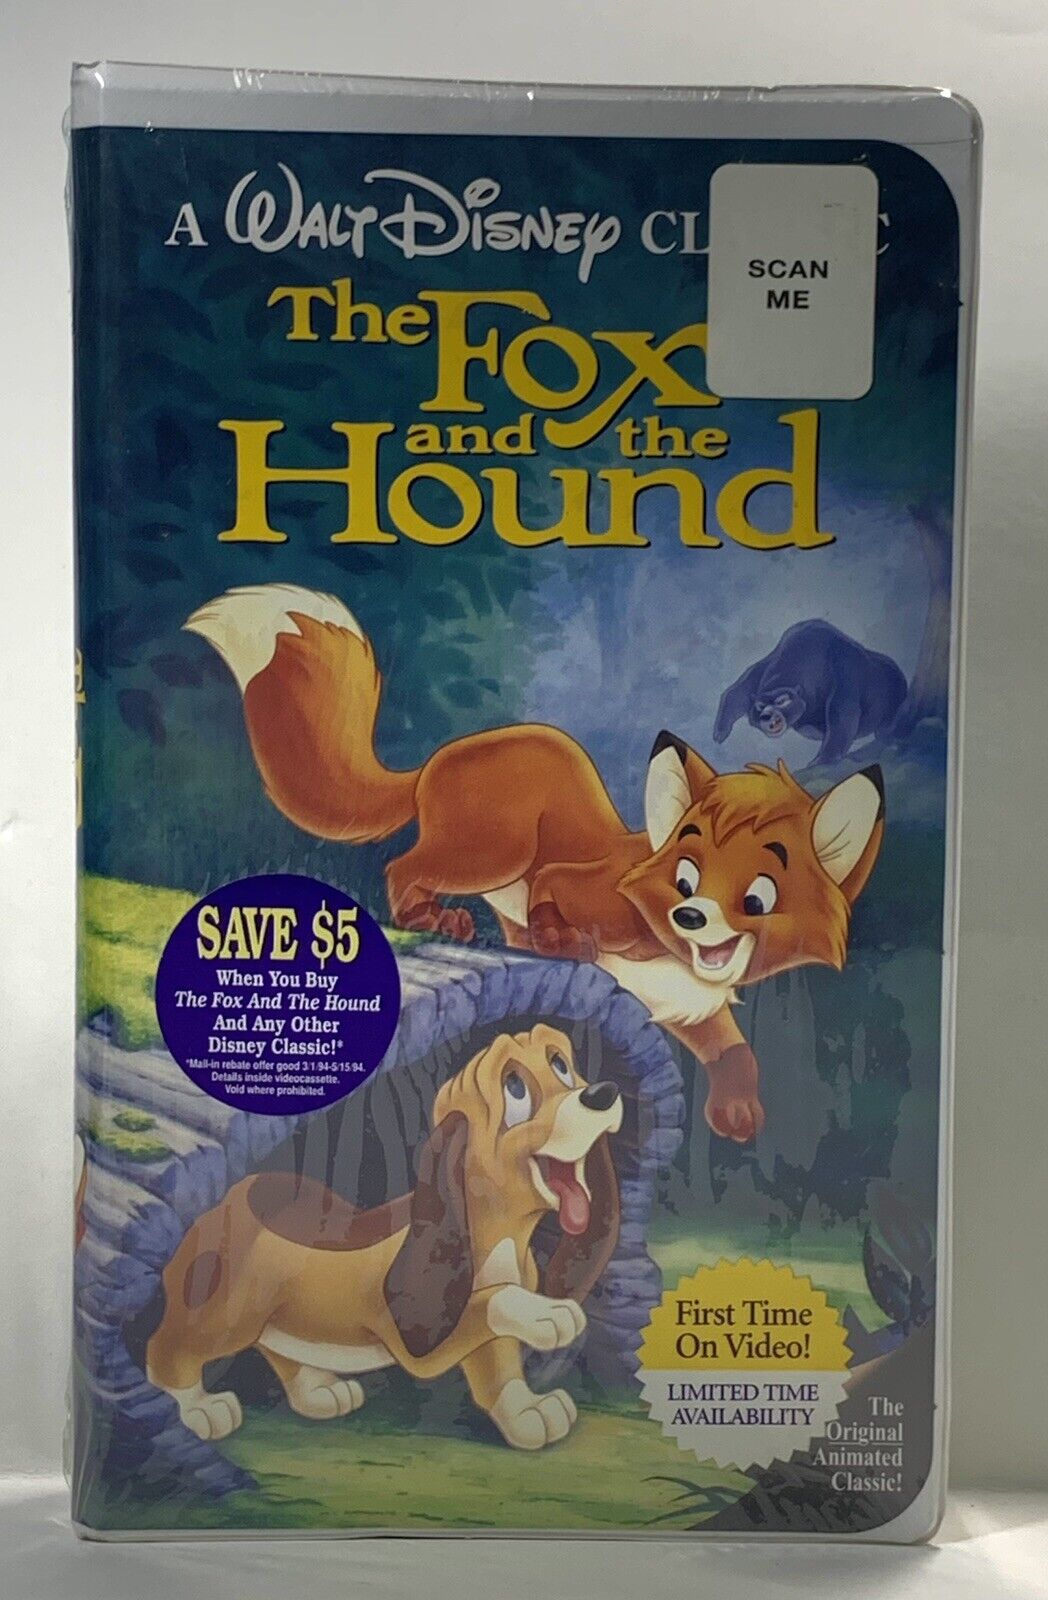 *SEALED* Vintage VHS: The Fox and The Hound - Disney